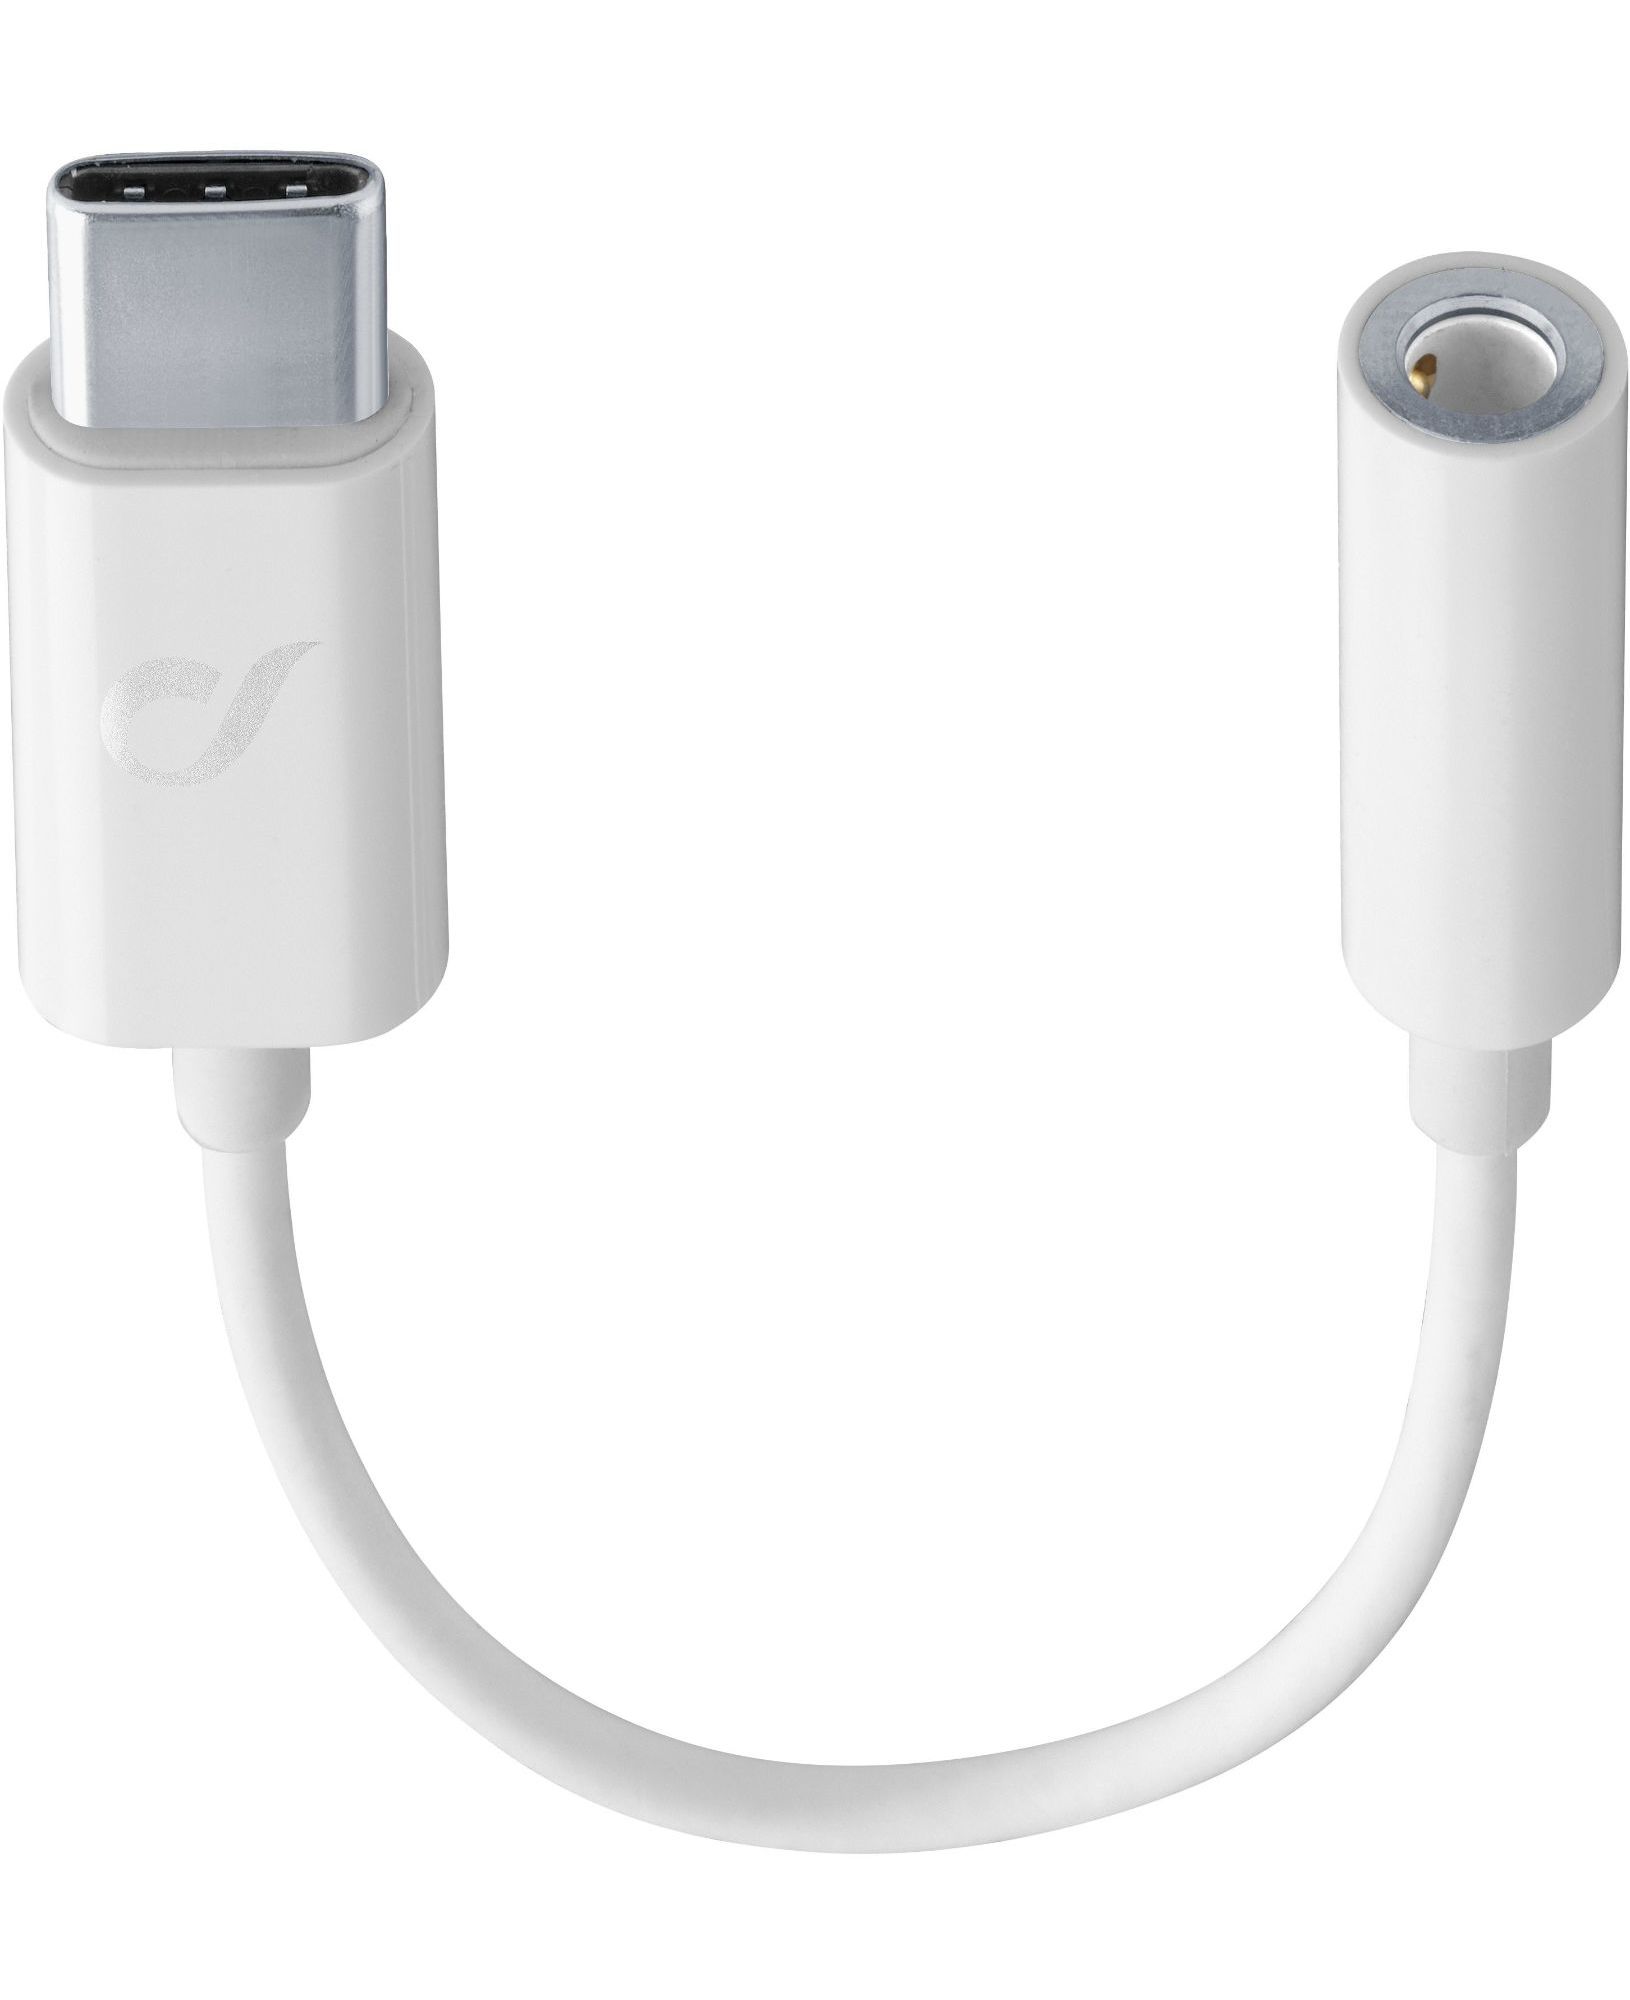 Adapter, aux-in to usb-c, white